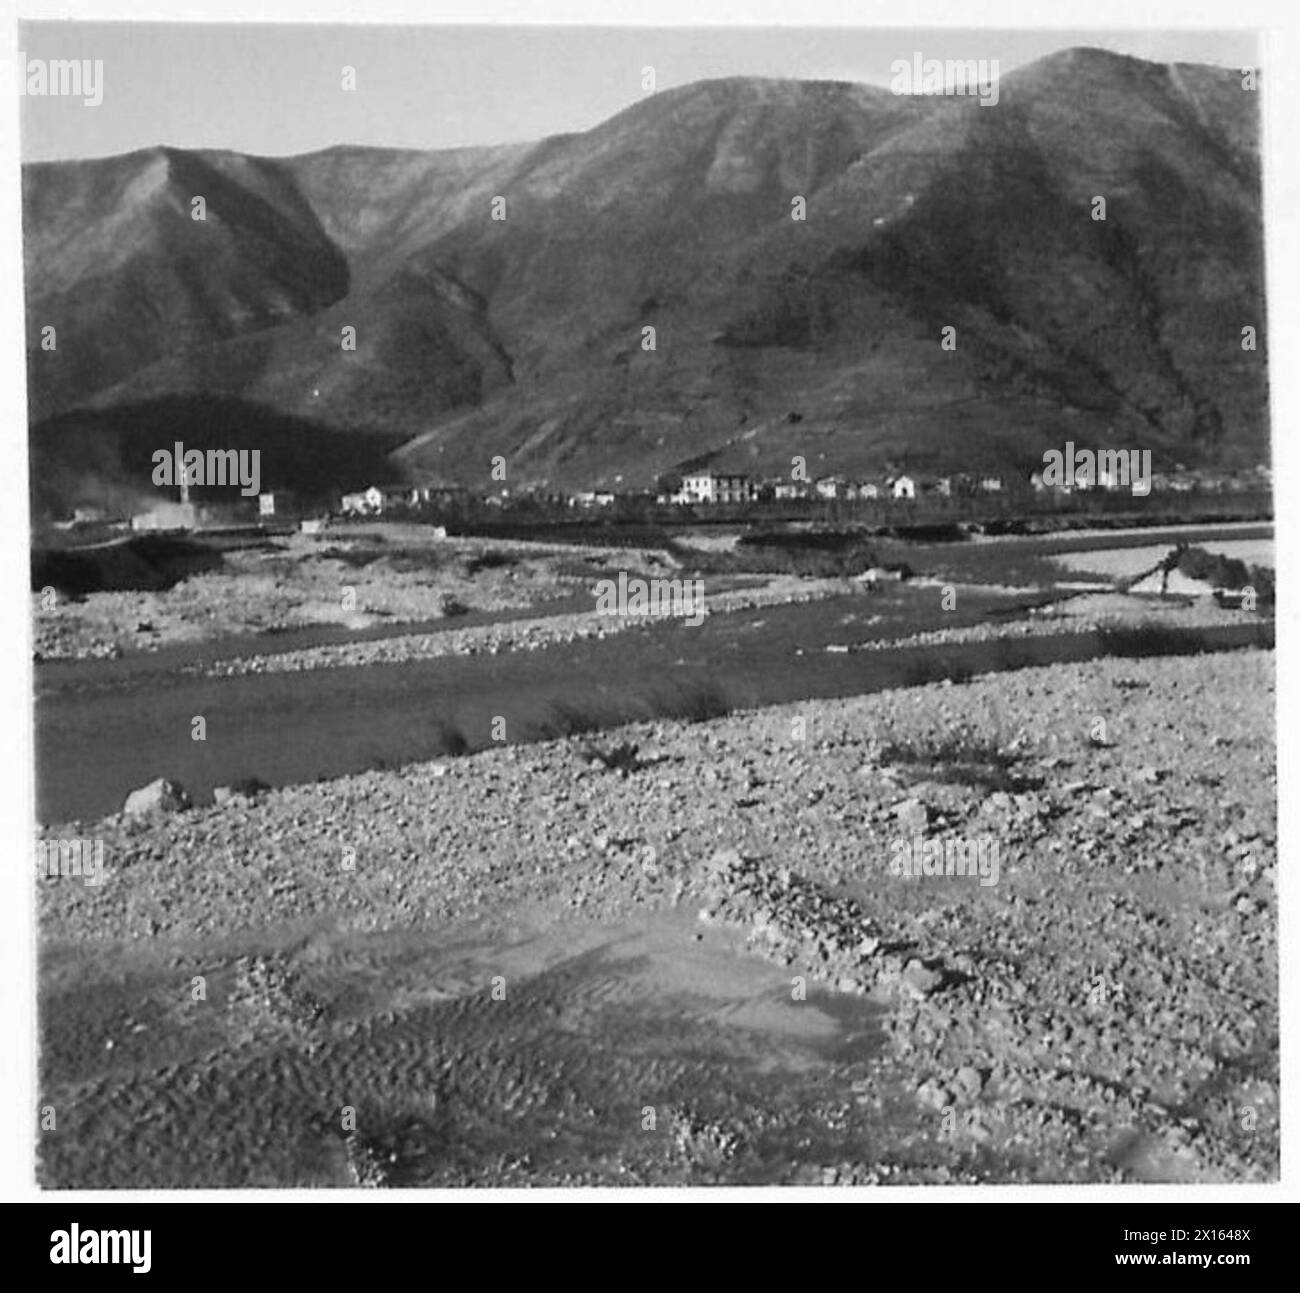 FIFTH ARMY : THE SERCHIO VALLEY - View across the River Serchio, with German defences almost washed away by the river British Army Stock Photo